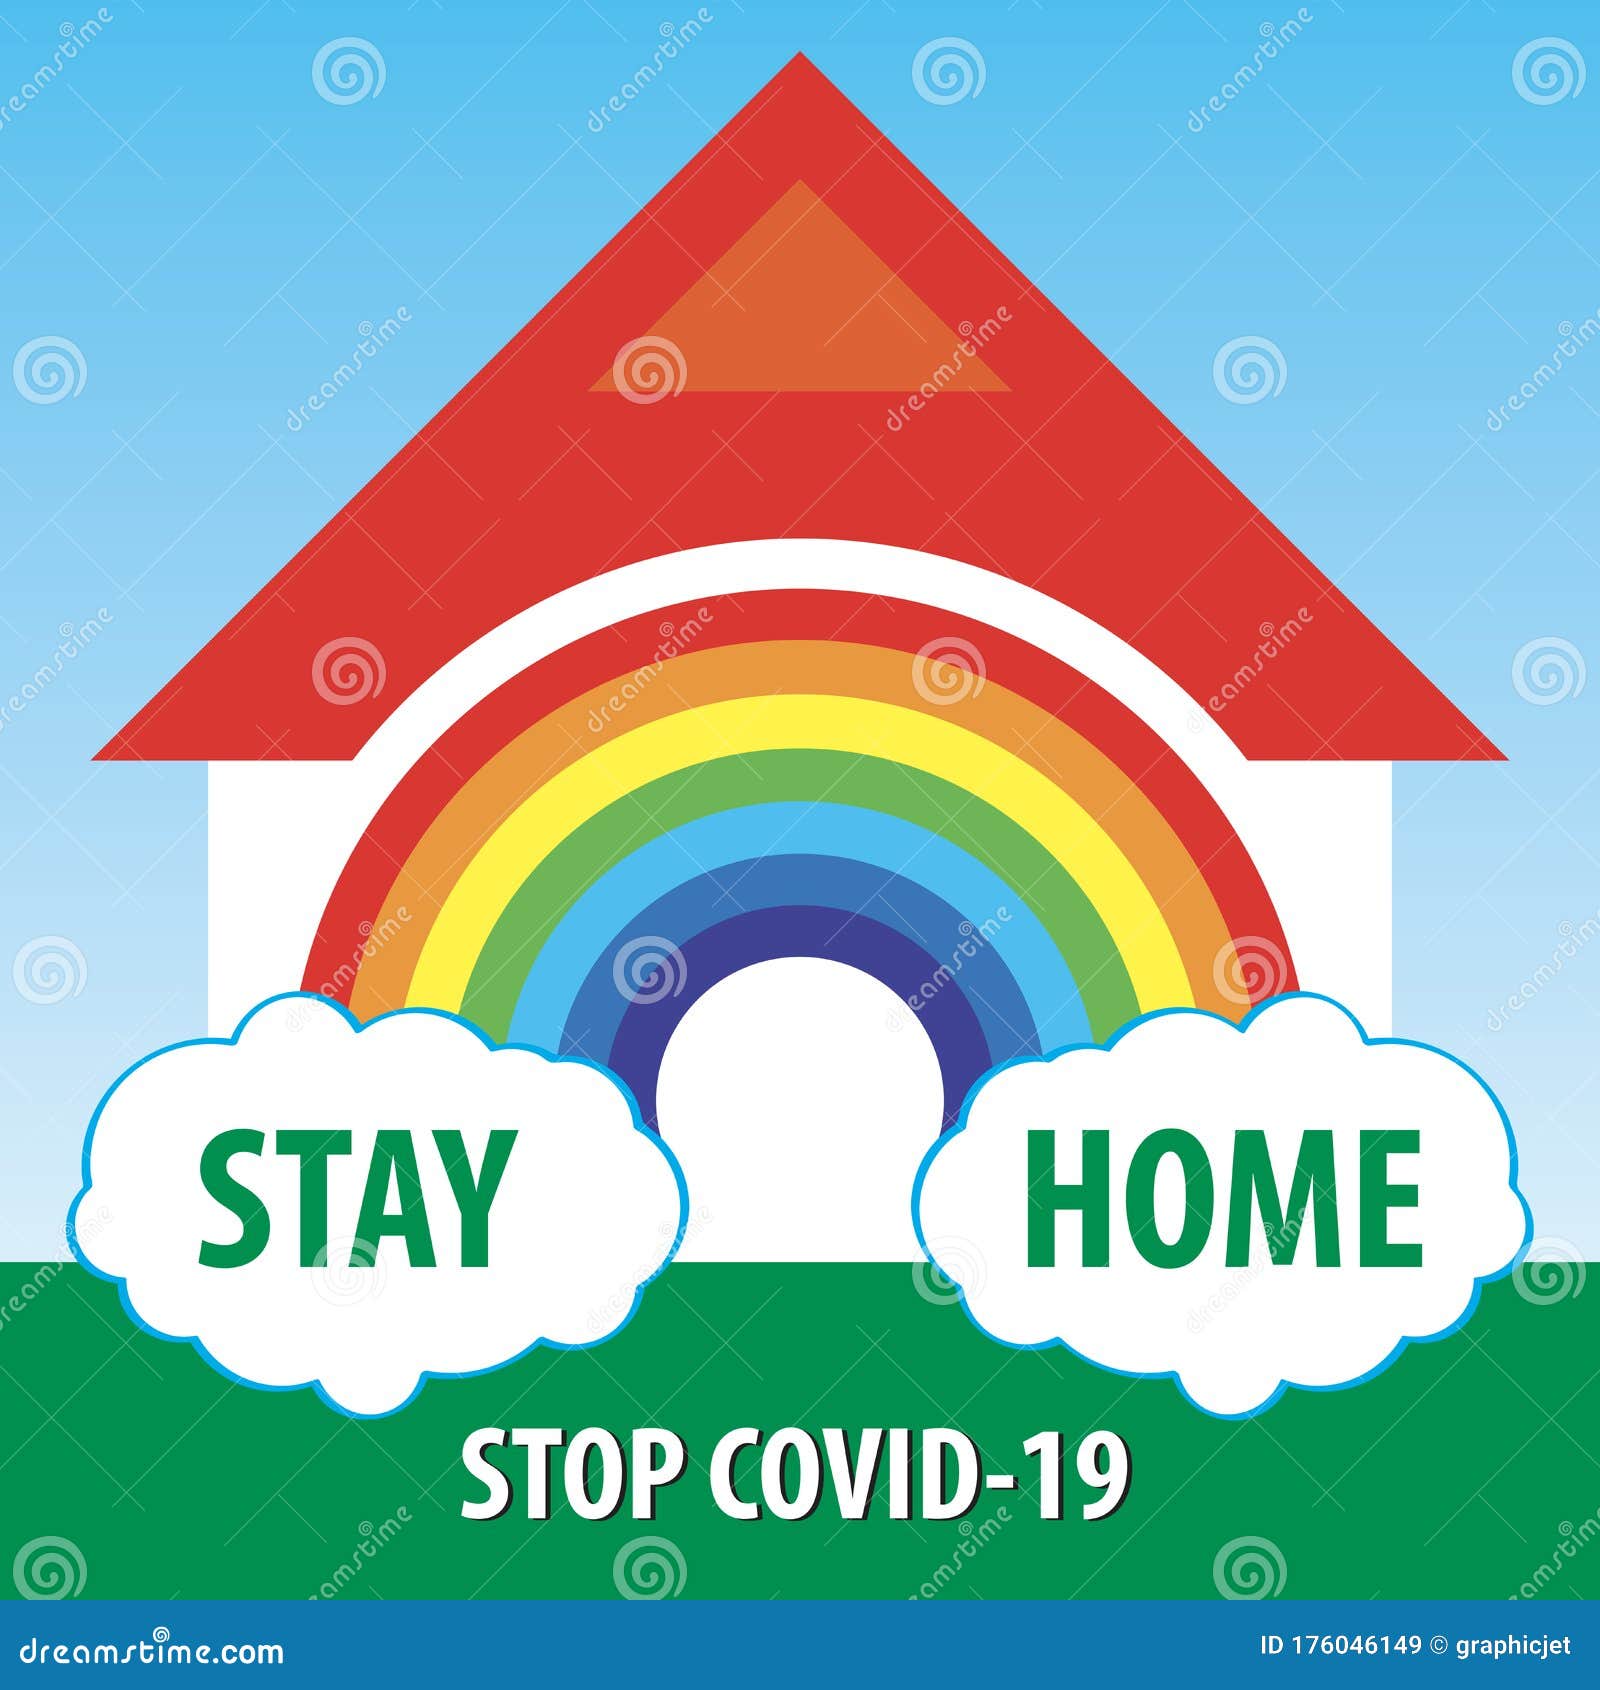 Stay At Home Warning Sign With Rainbow, For Covid-19 Emergency ...